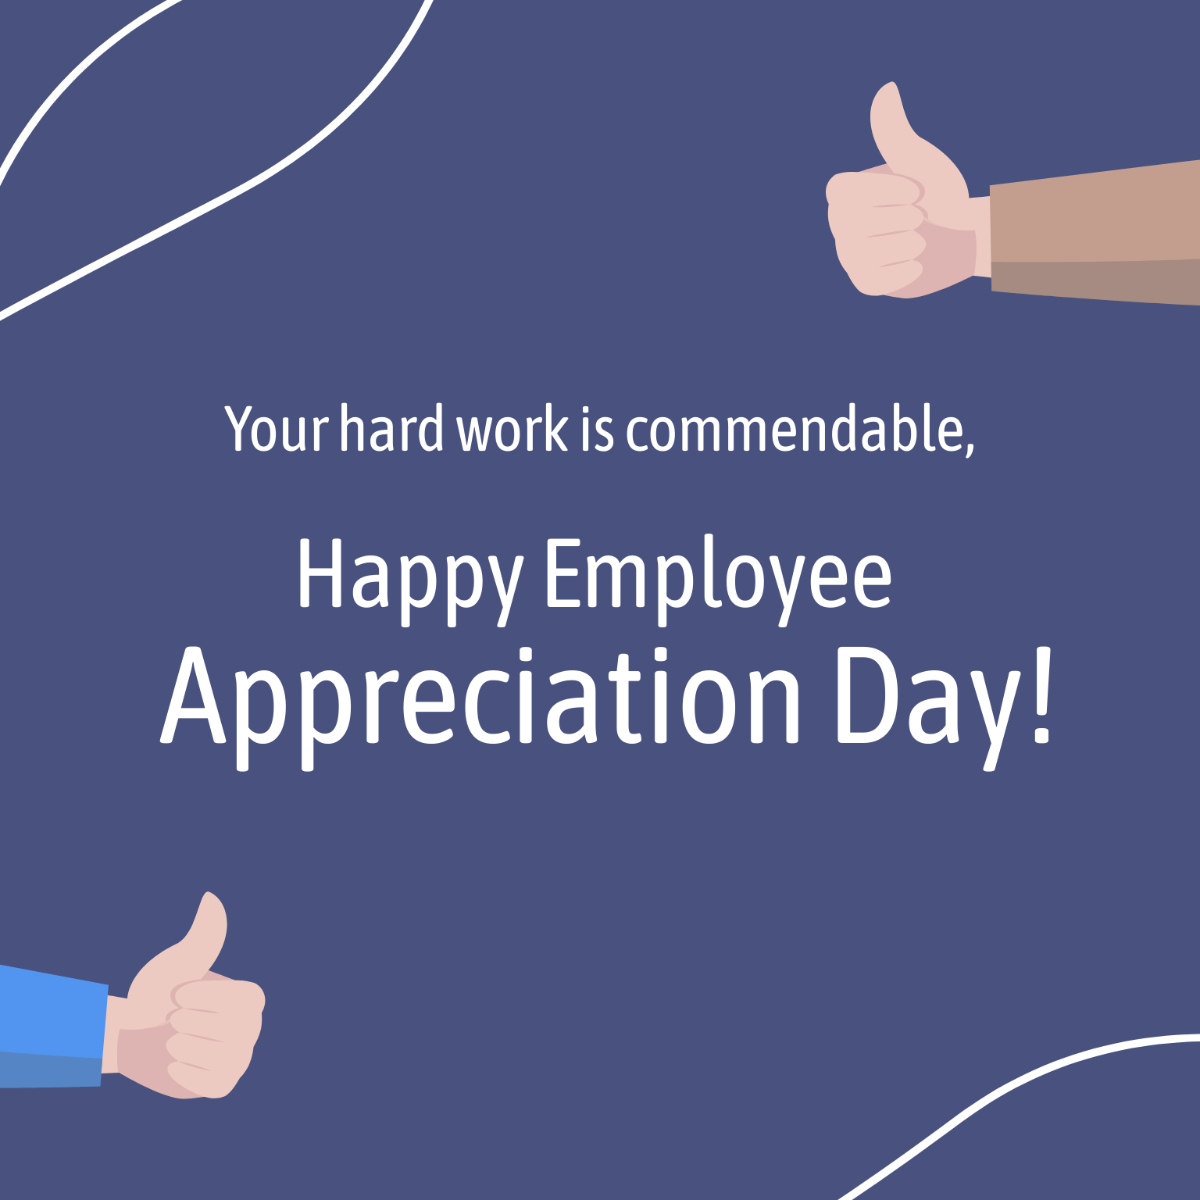 Employee Appreciation Day Wishes Vector Template